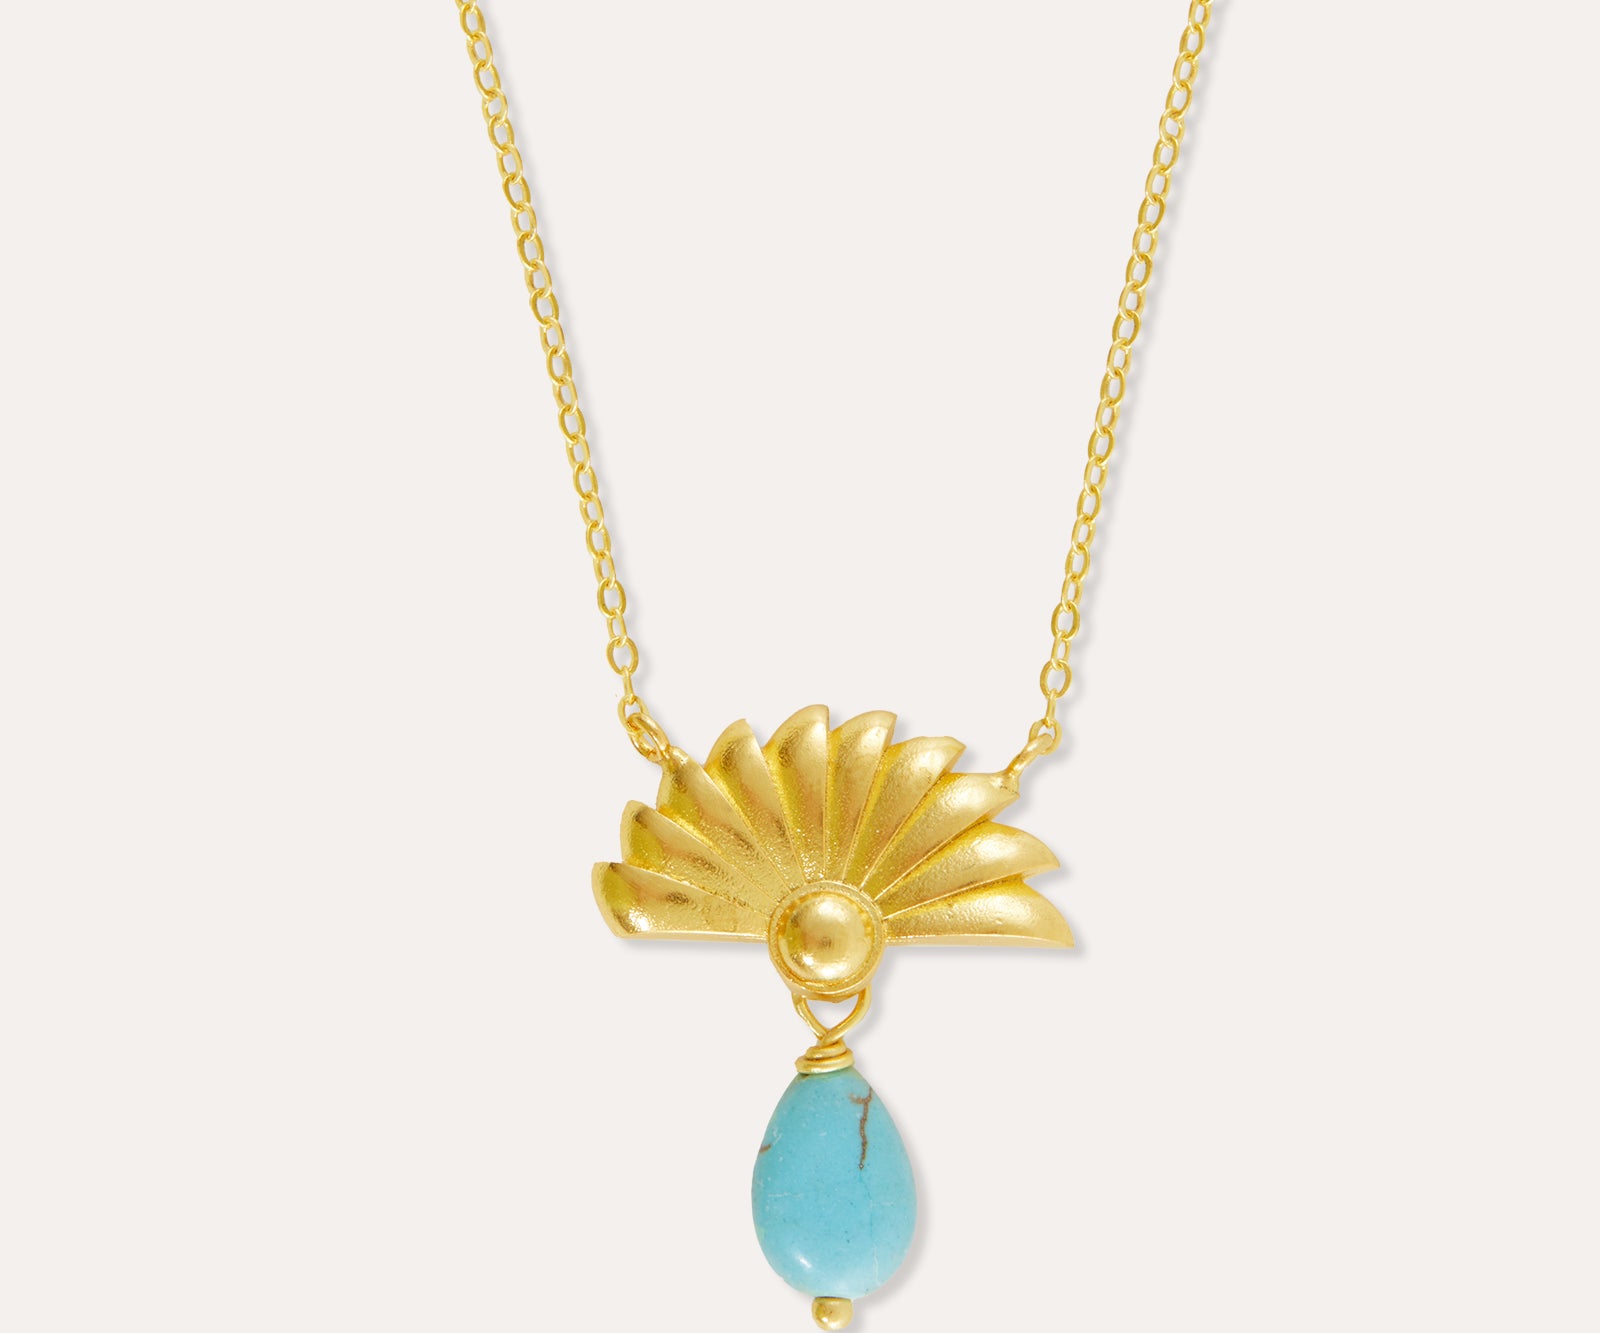 Chantal Turquoise Pendant Necklace | Sustainable Jewellery by Ottoman Hands